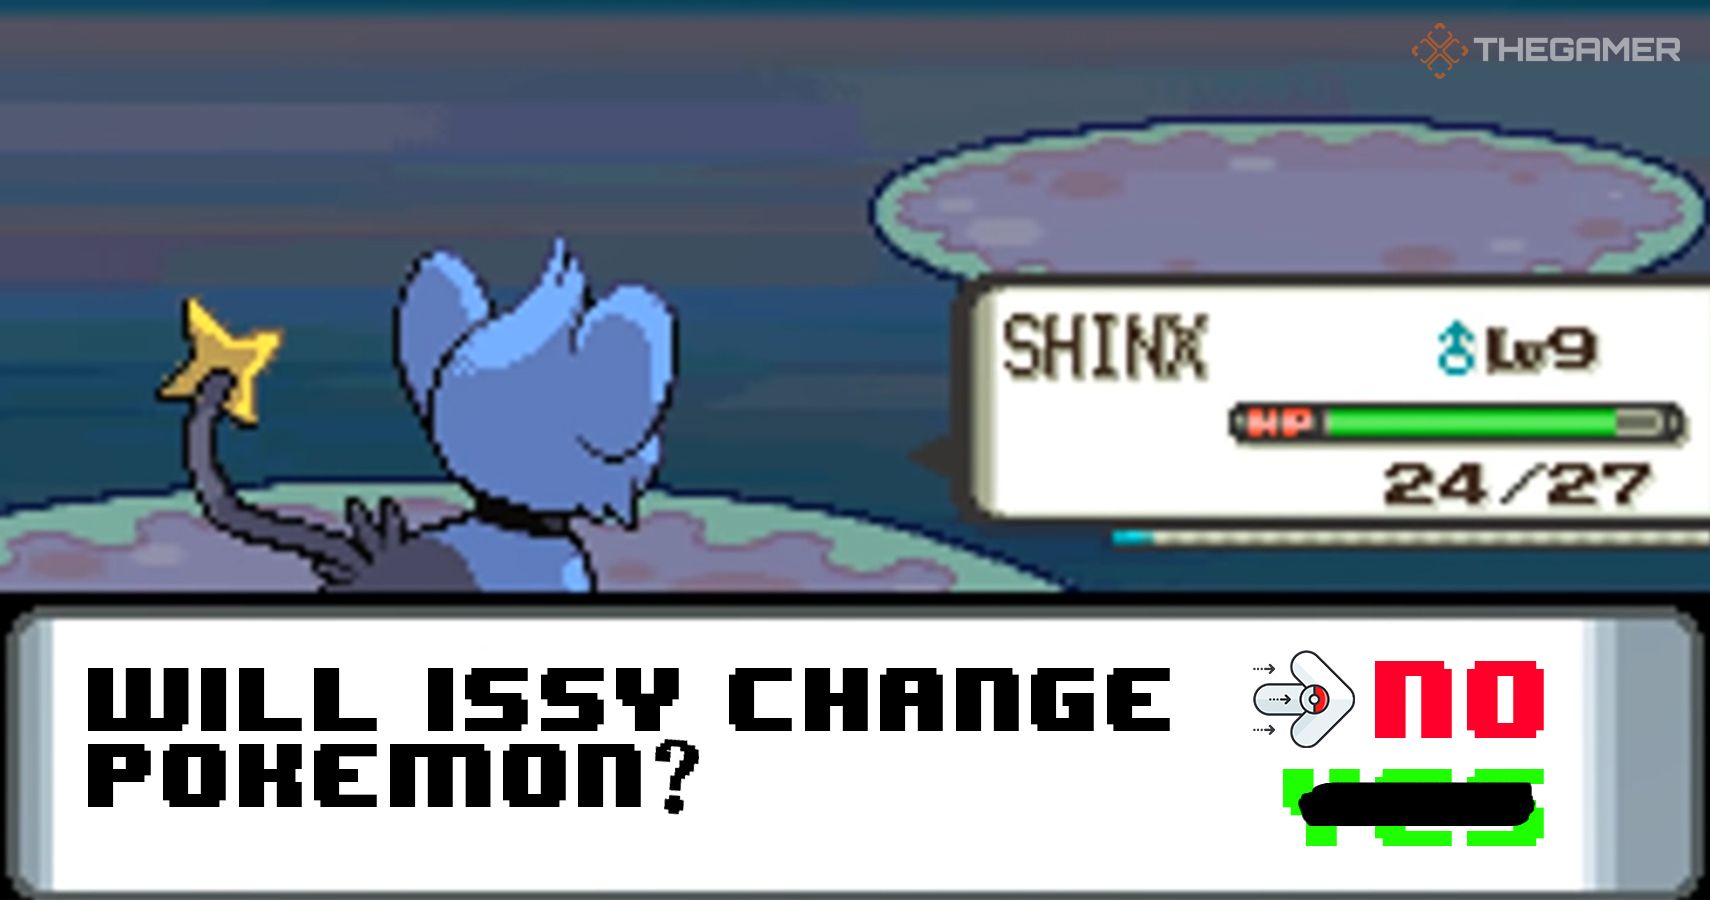 a shinx that has just defeated an opposing pokemon. the option to switch appears but the shinx stays in